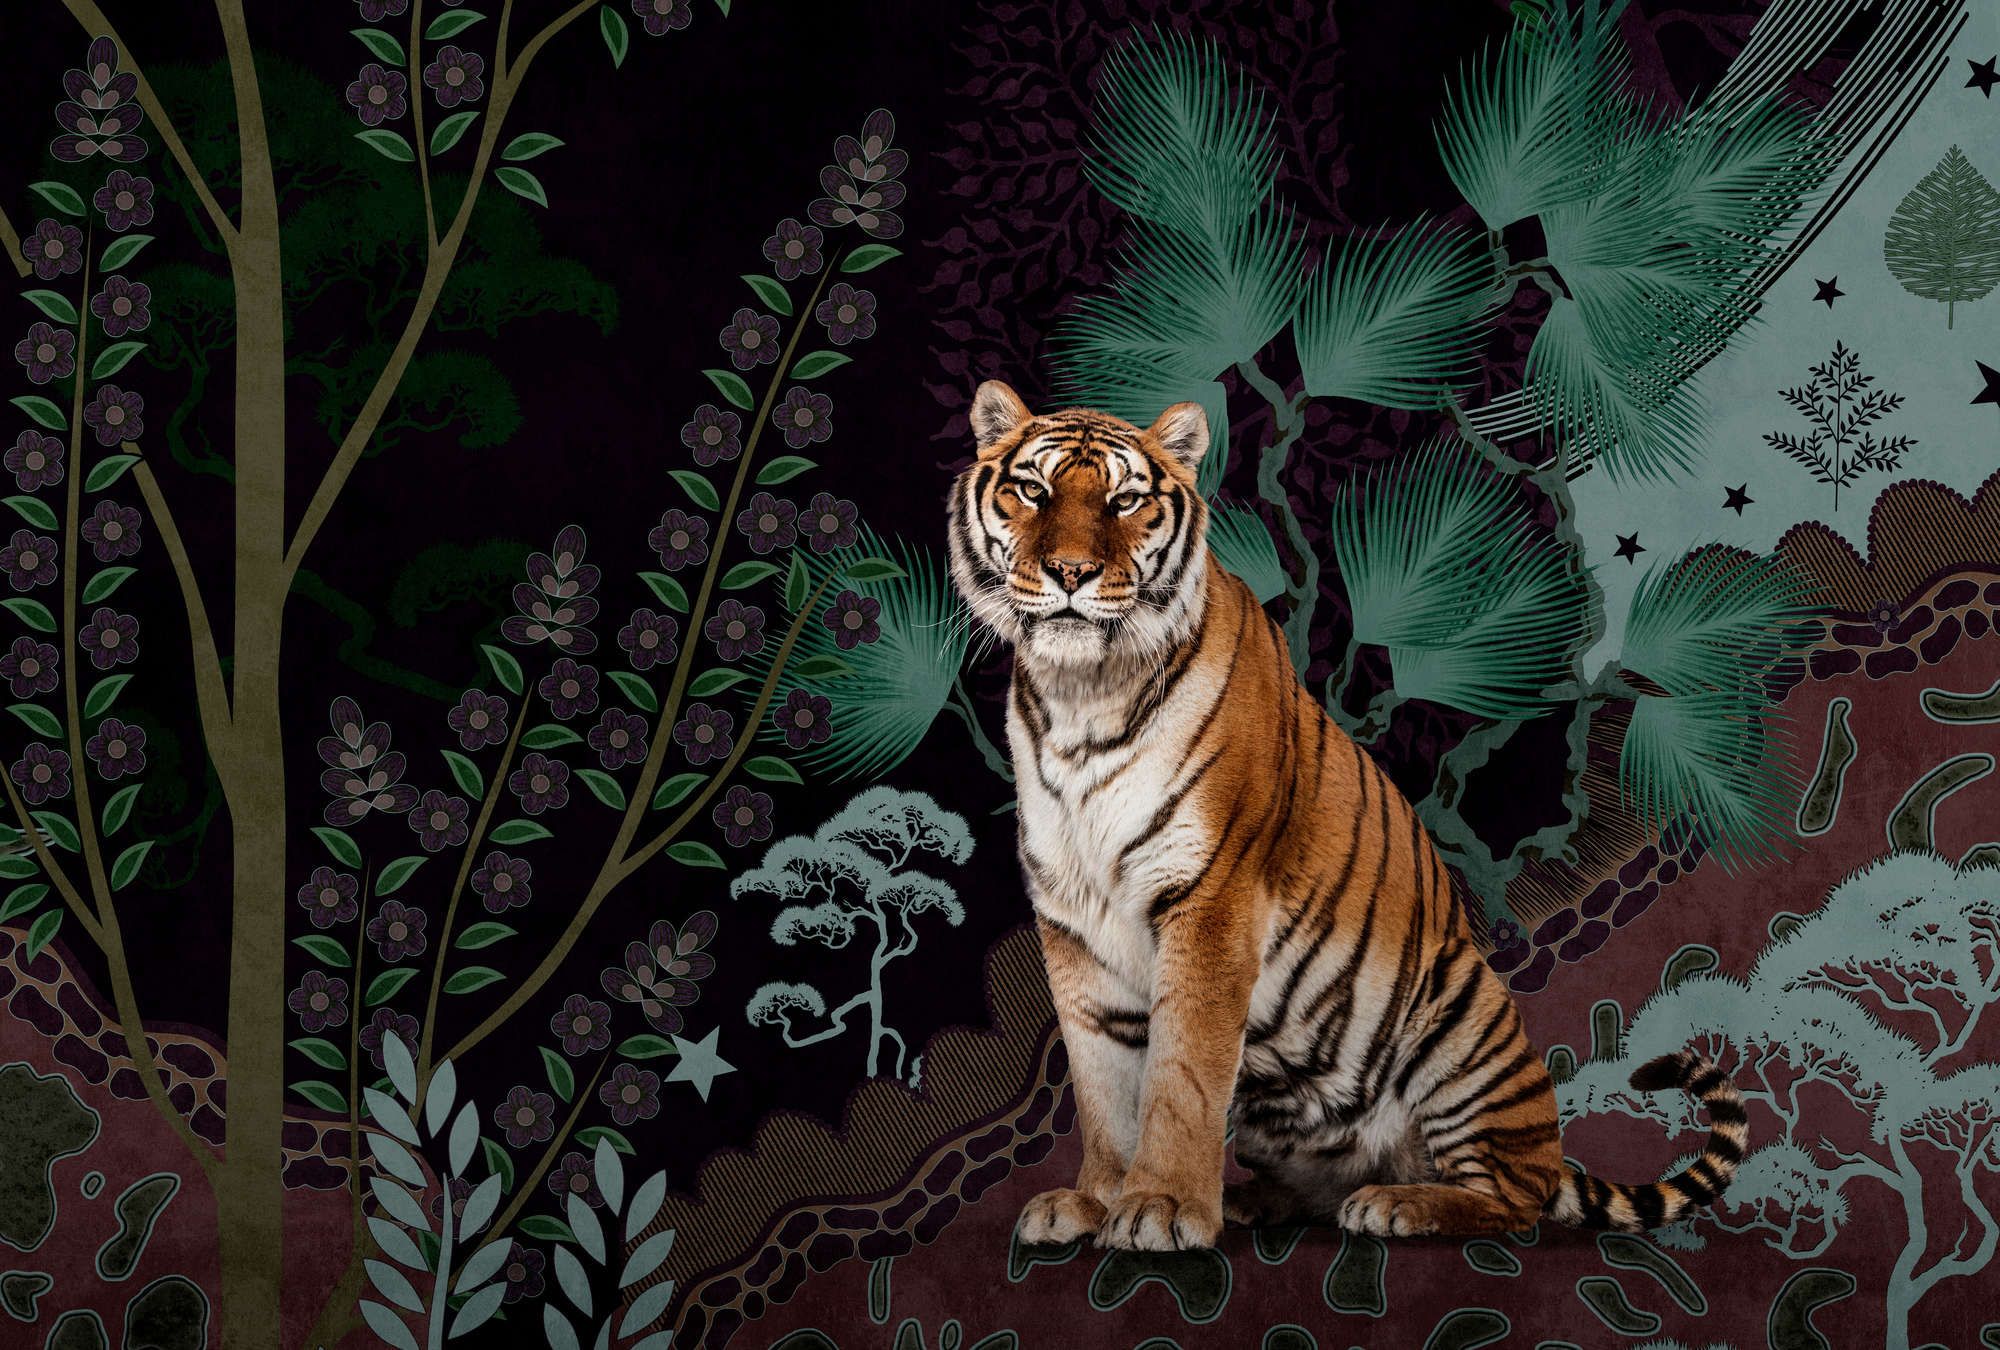             Photo wallpaper »khan« - Abstract jungle motif with tiger - Smooth, slightly pearlescent non-woven fabric
        